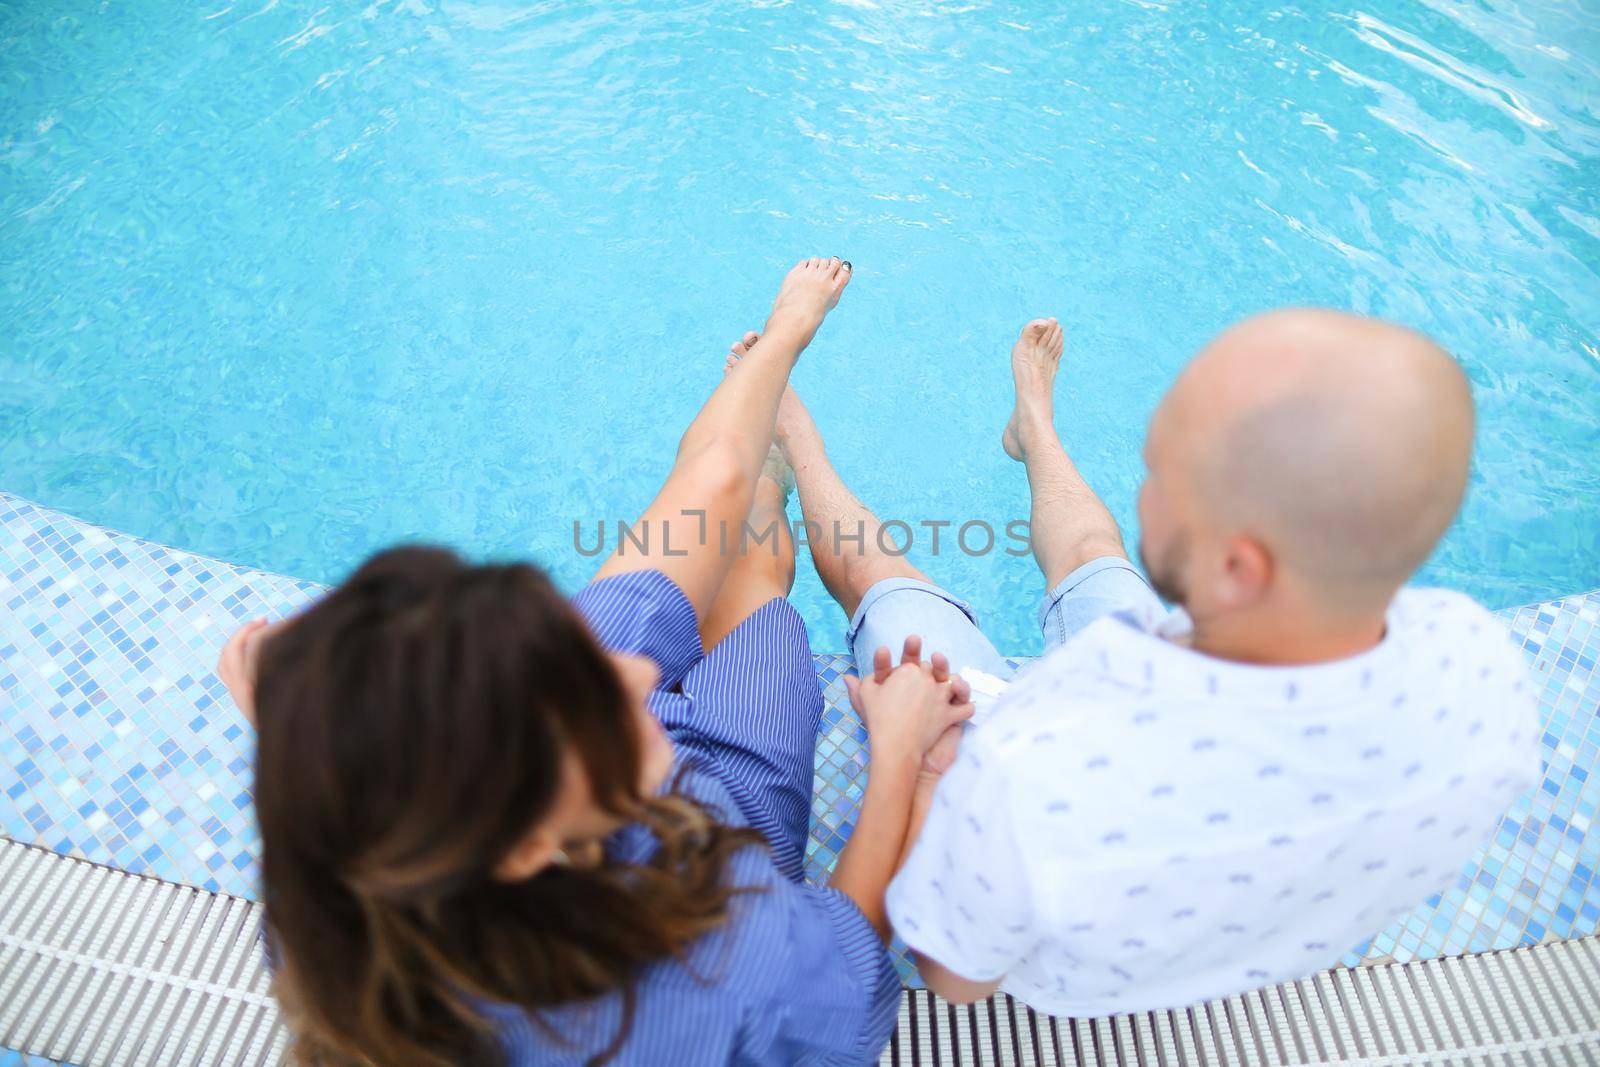 Husband and wife sitting barefoot near swiming pool. Concept of happy couple and summer vacations on resort.